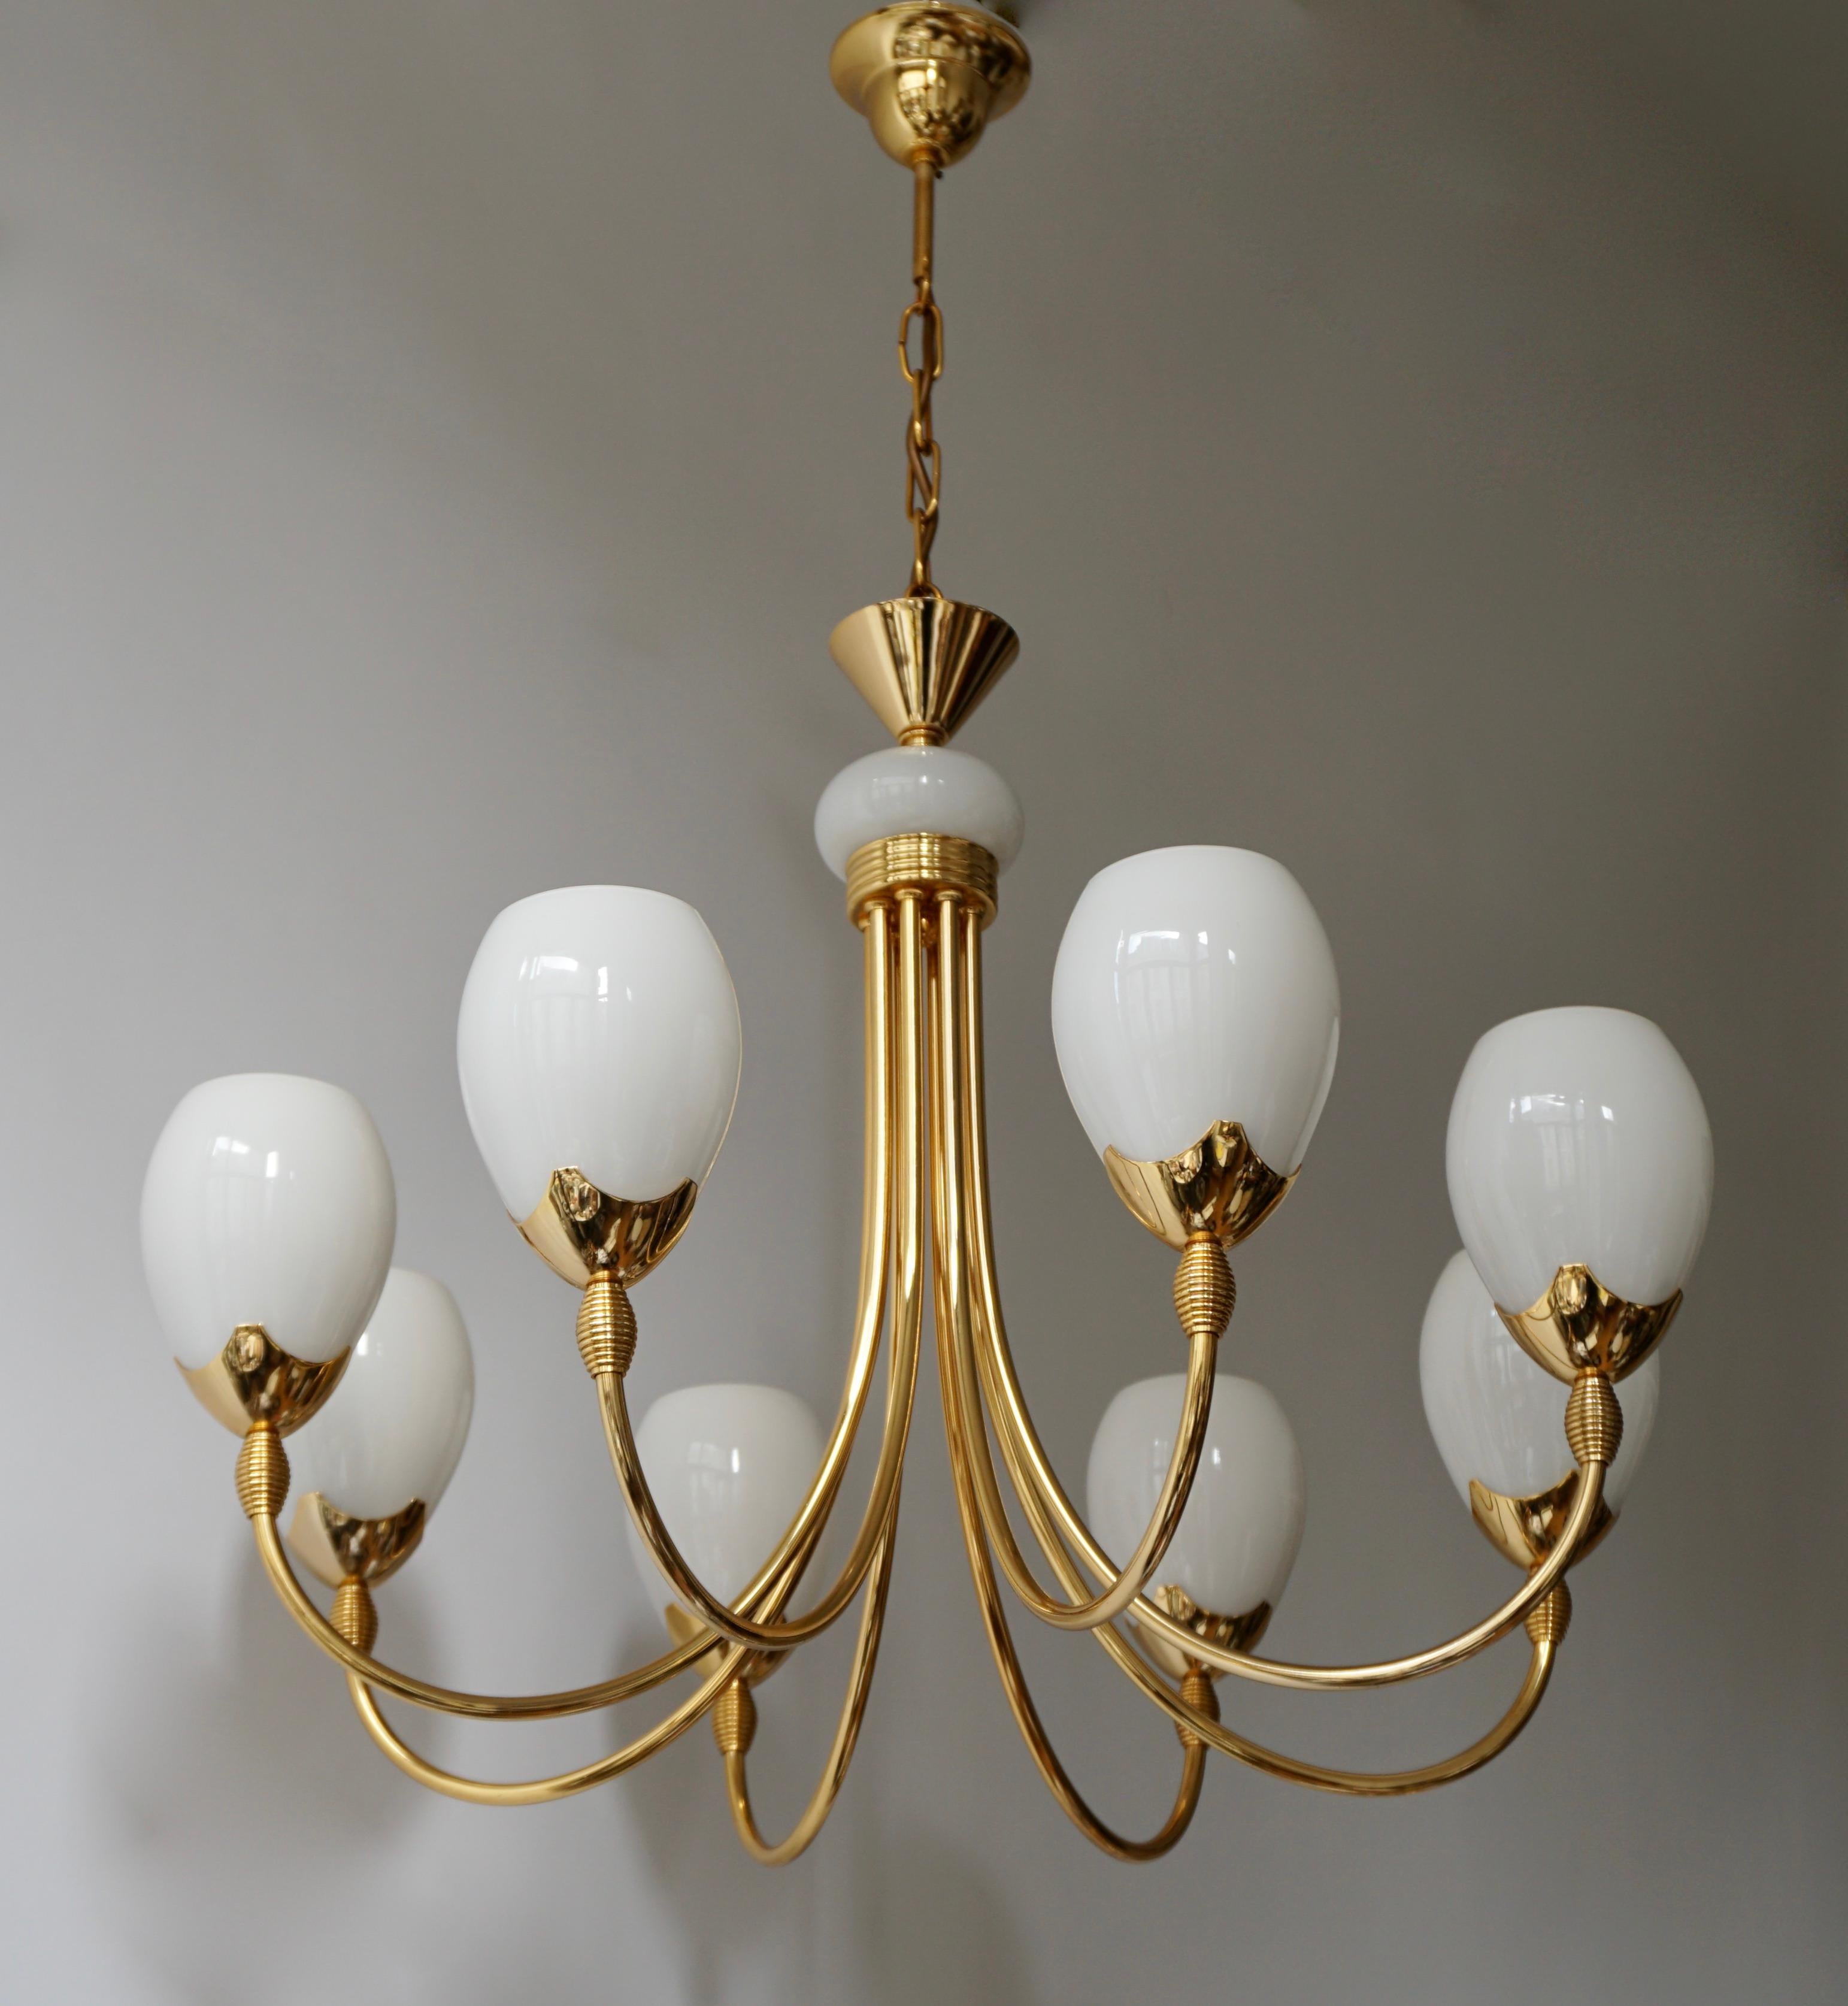 Italian Murano glass and brass chandelier with eight hand blown cups. Holds eight E14 candelabra base bulbs.
This piece displays the best quality of Murano art as well as brass craft at the highest level, the design is impeccable and the result is